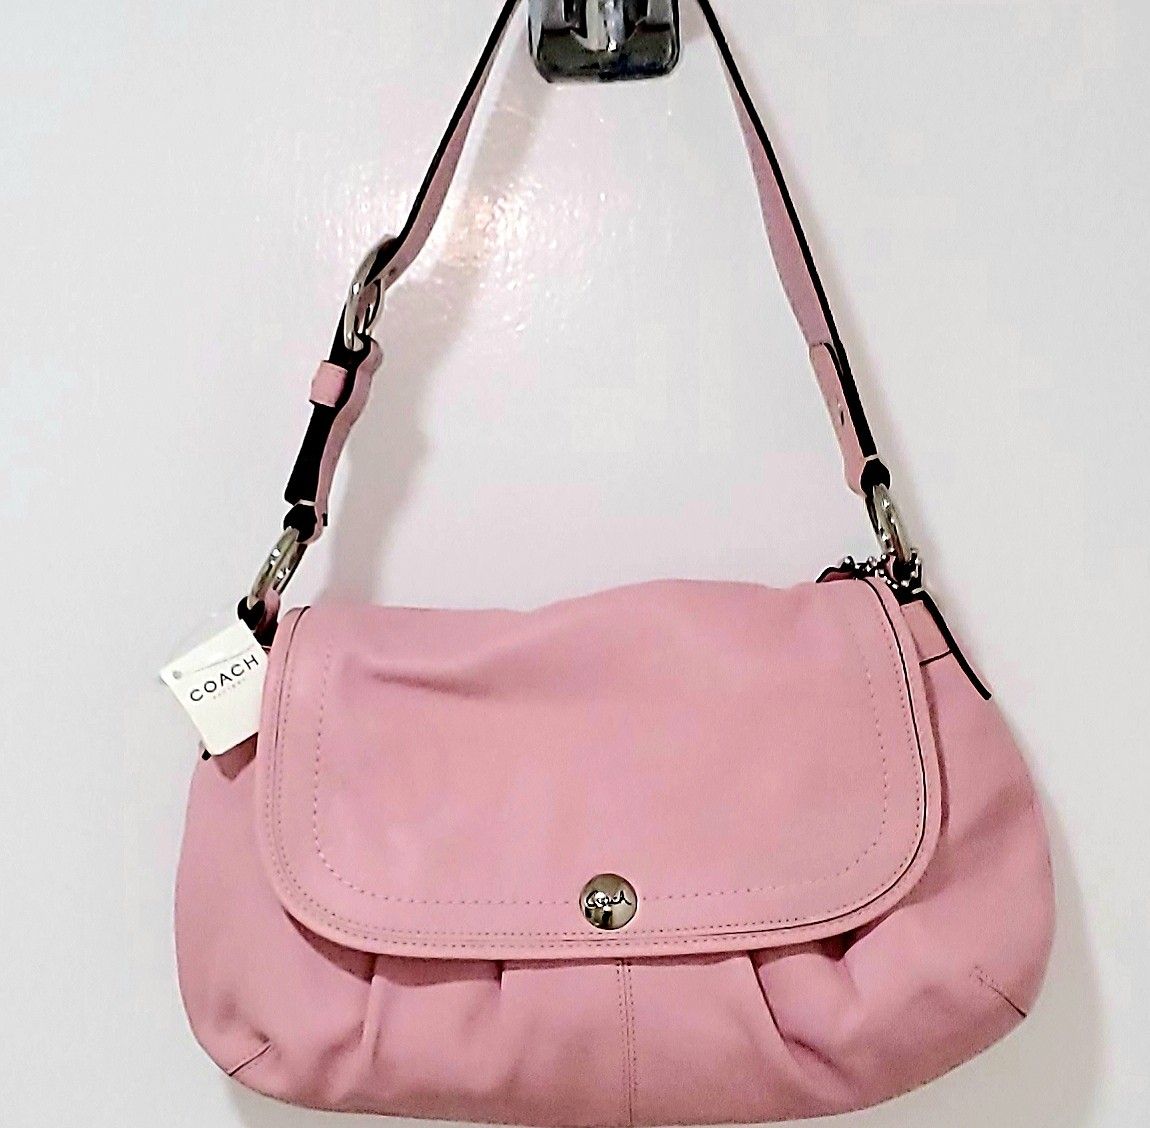 COACH Blush Colored Leather Handbag is *Brand New-never Used